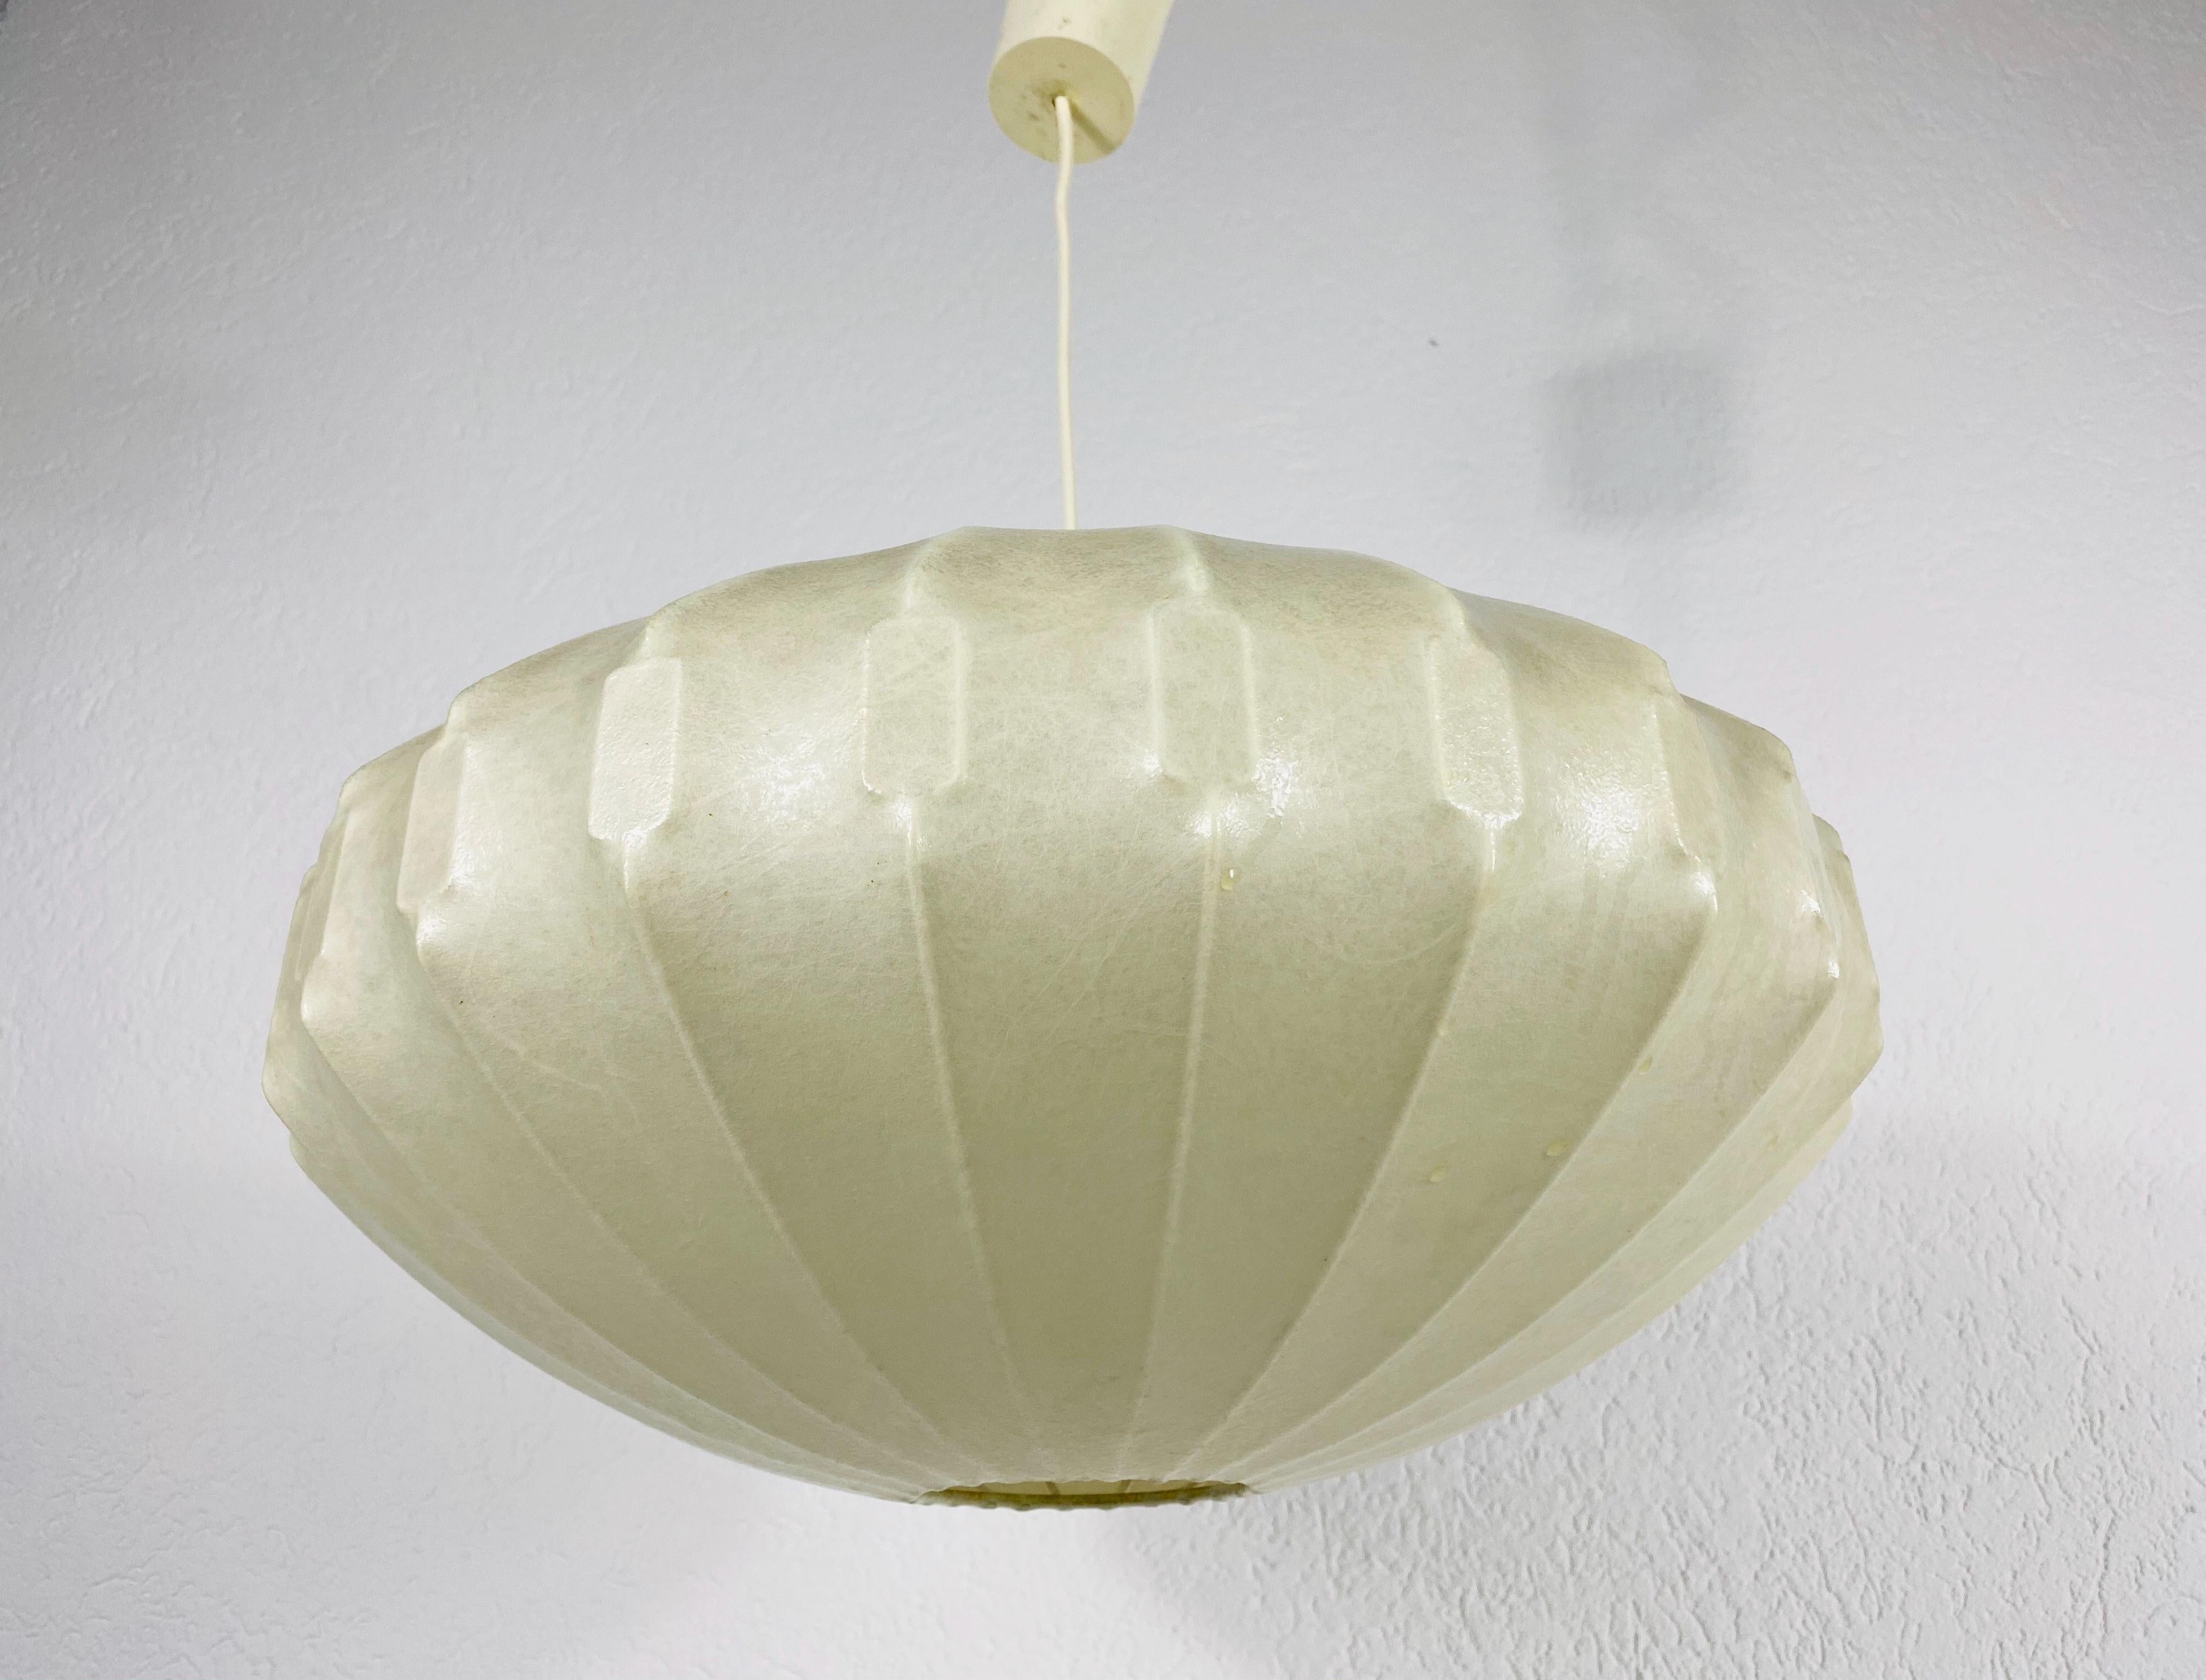 A cocoon hanging lamp made in Italy in the 1960s. It has a beautiful Losange design made by Castiglioni. The lighting is in a very good vintage condition.

Measures: Max height 100 cm
Height of shade 25 cm
Diameter 46 cm 

The light requires